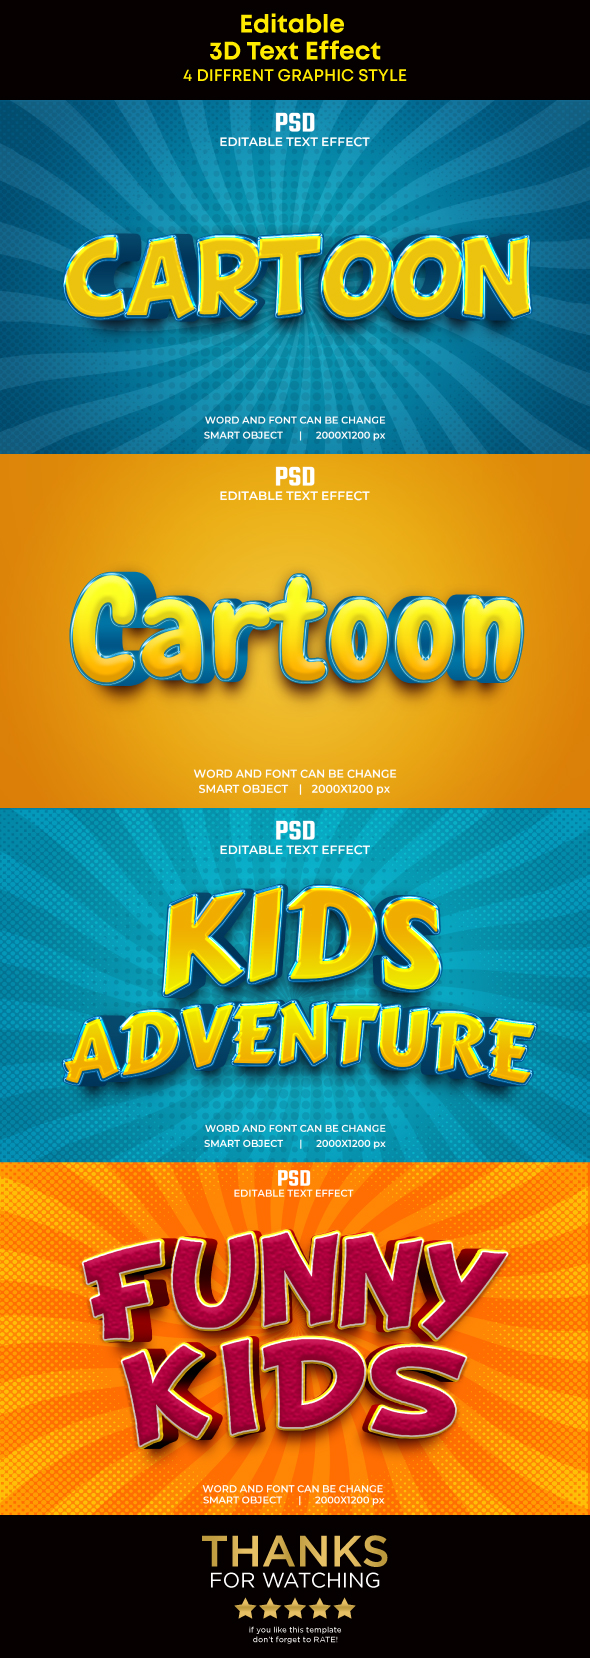 4 Cartoon Style 3D Editable Text Effect with Background